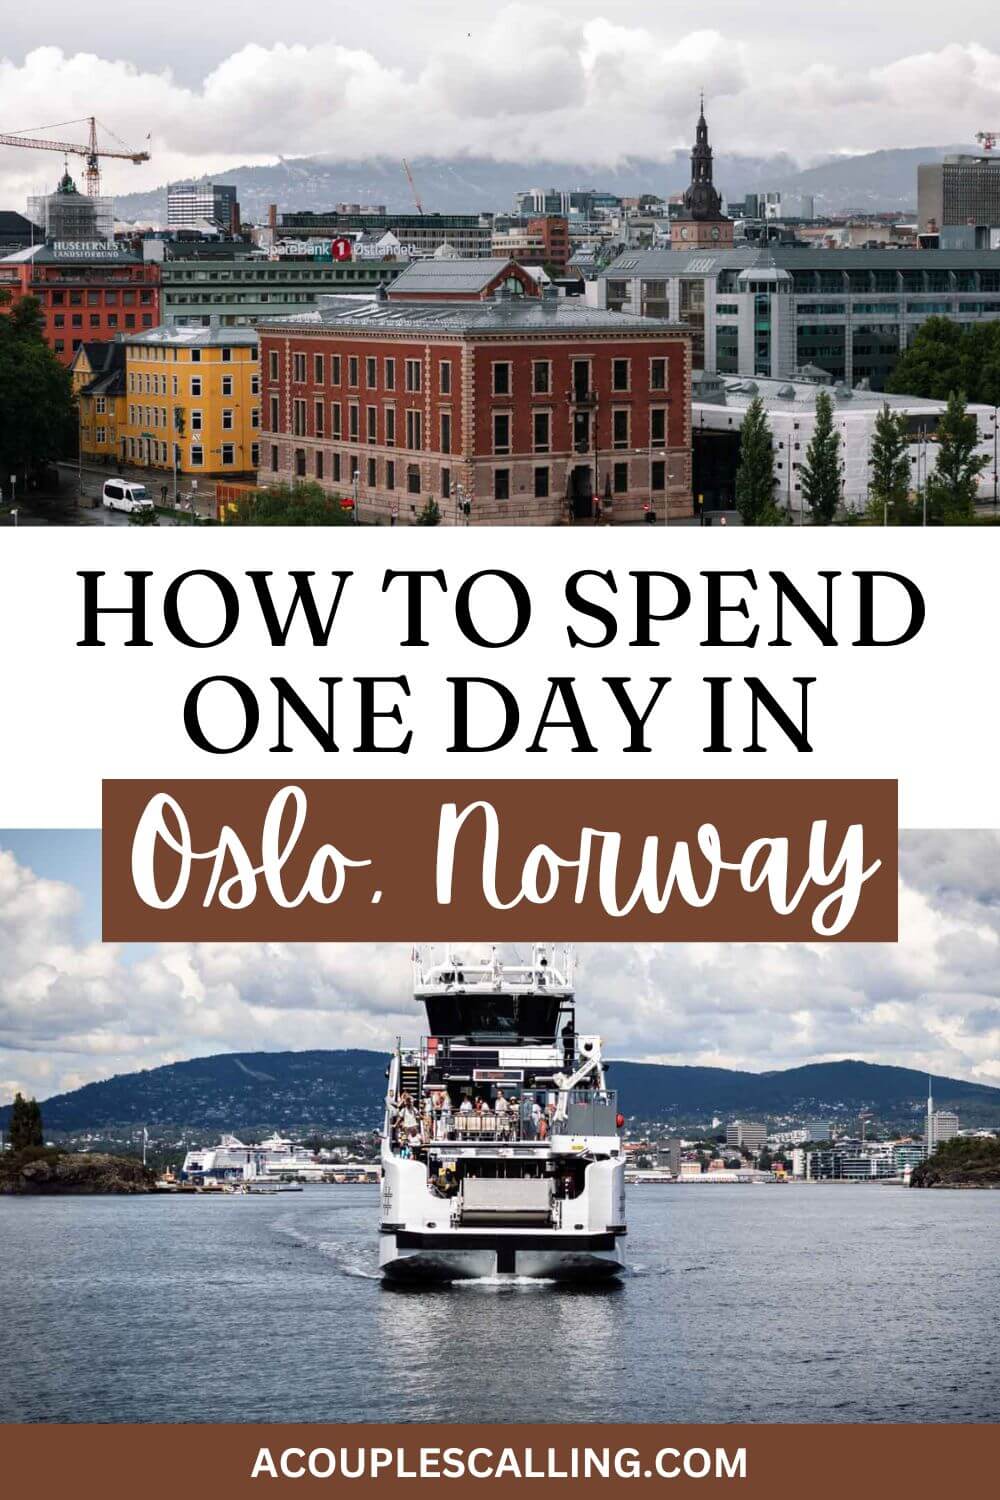 One day in Oslo